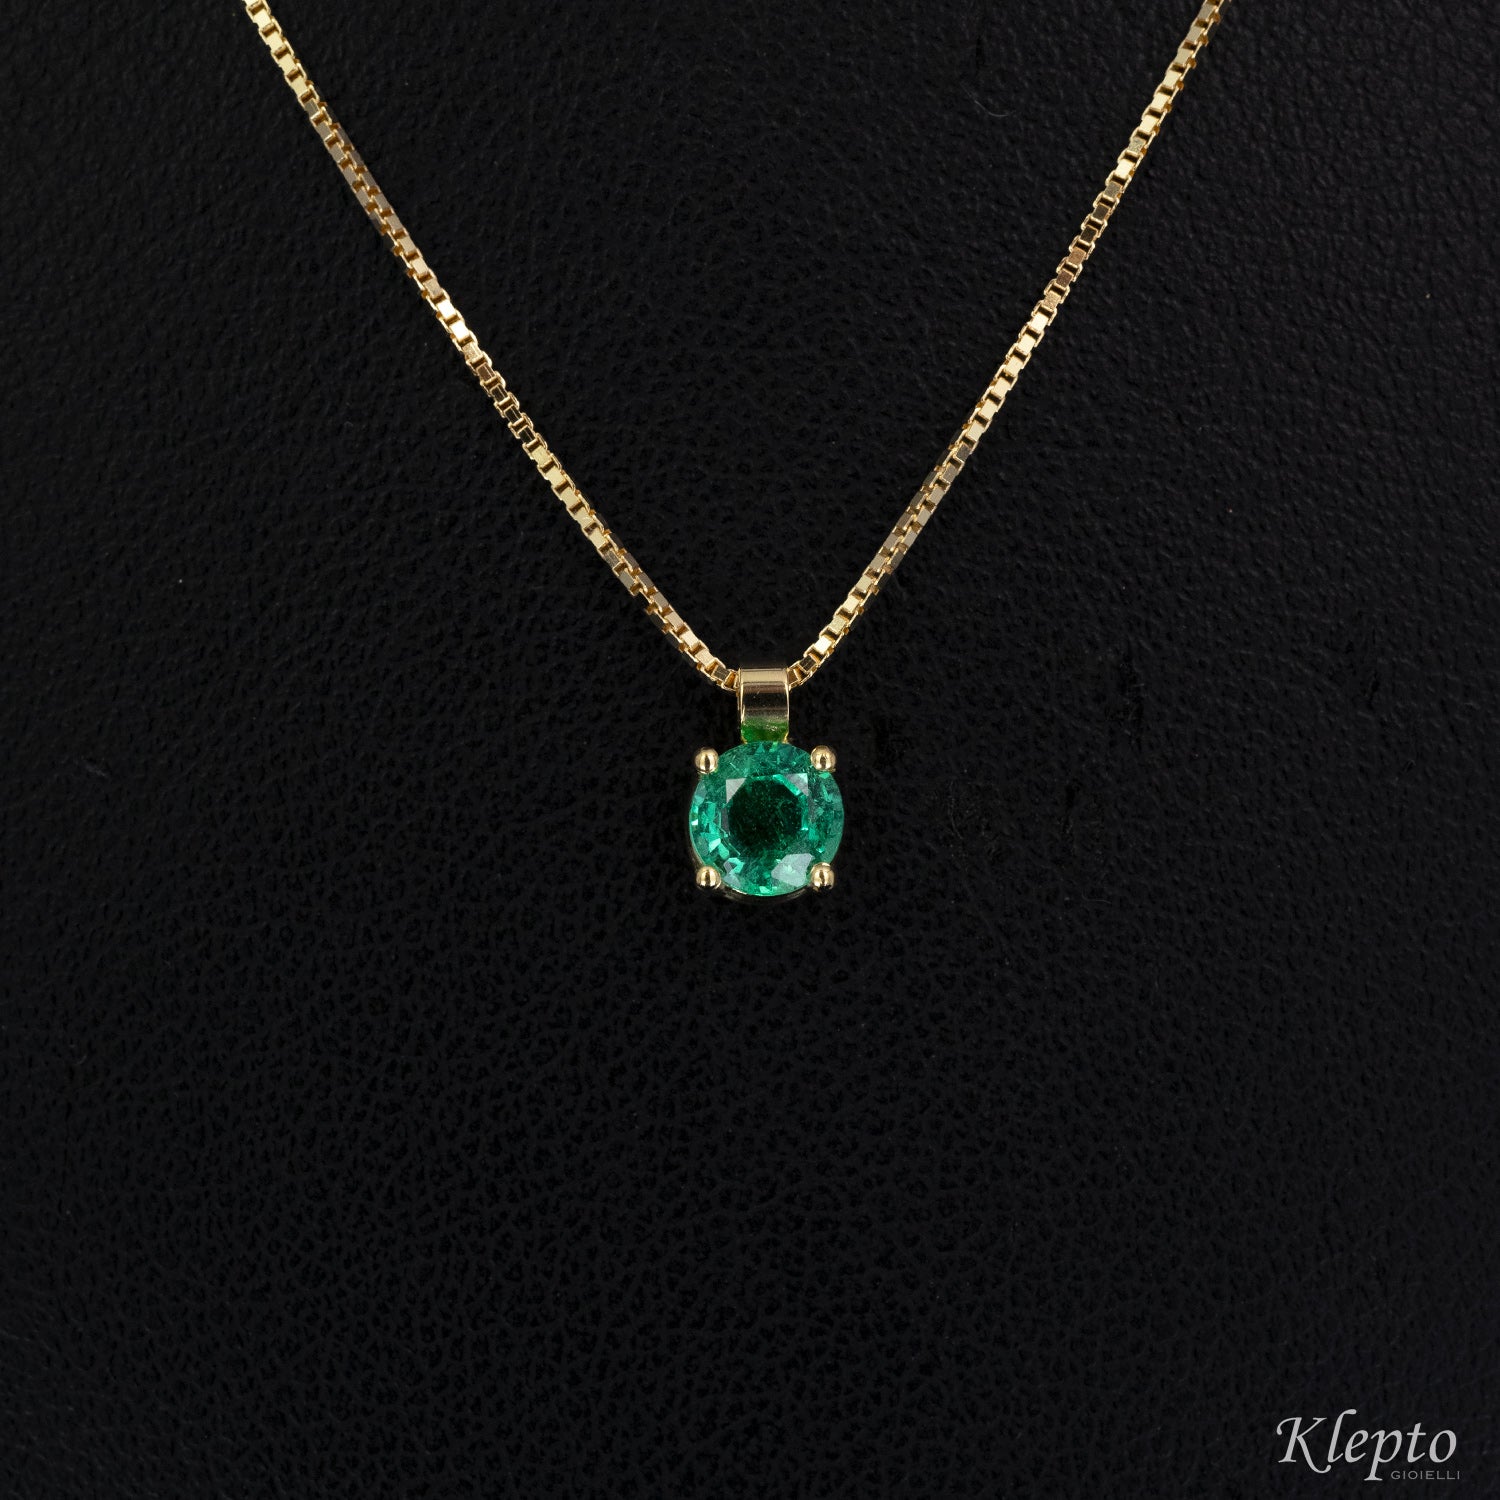 Light point yellow gold pendant with Emerald